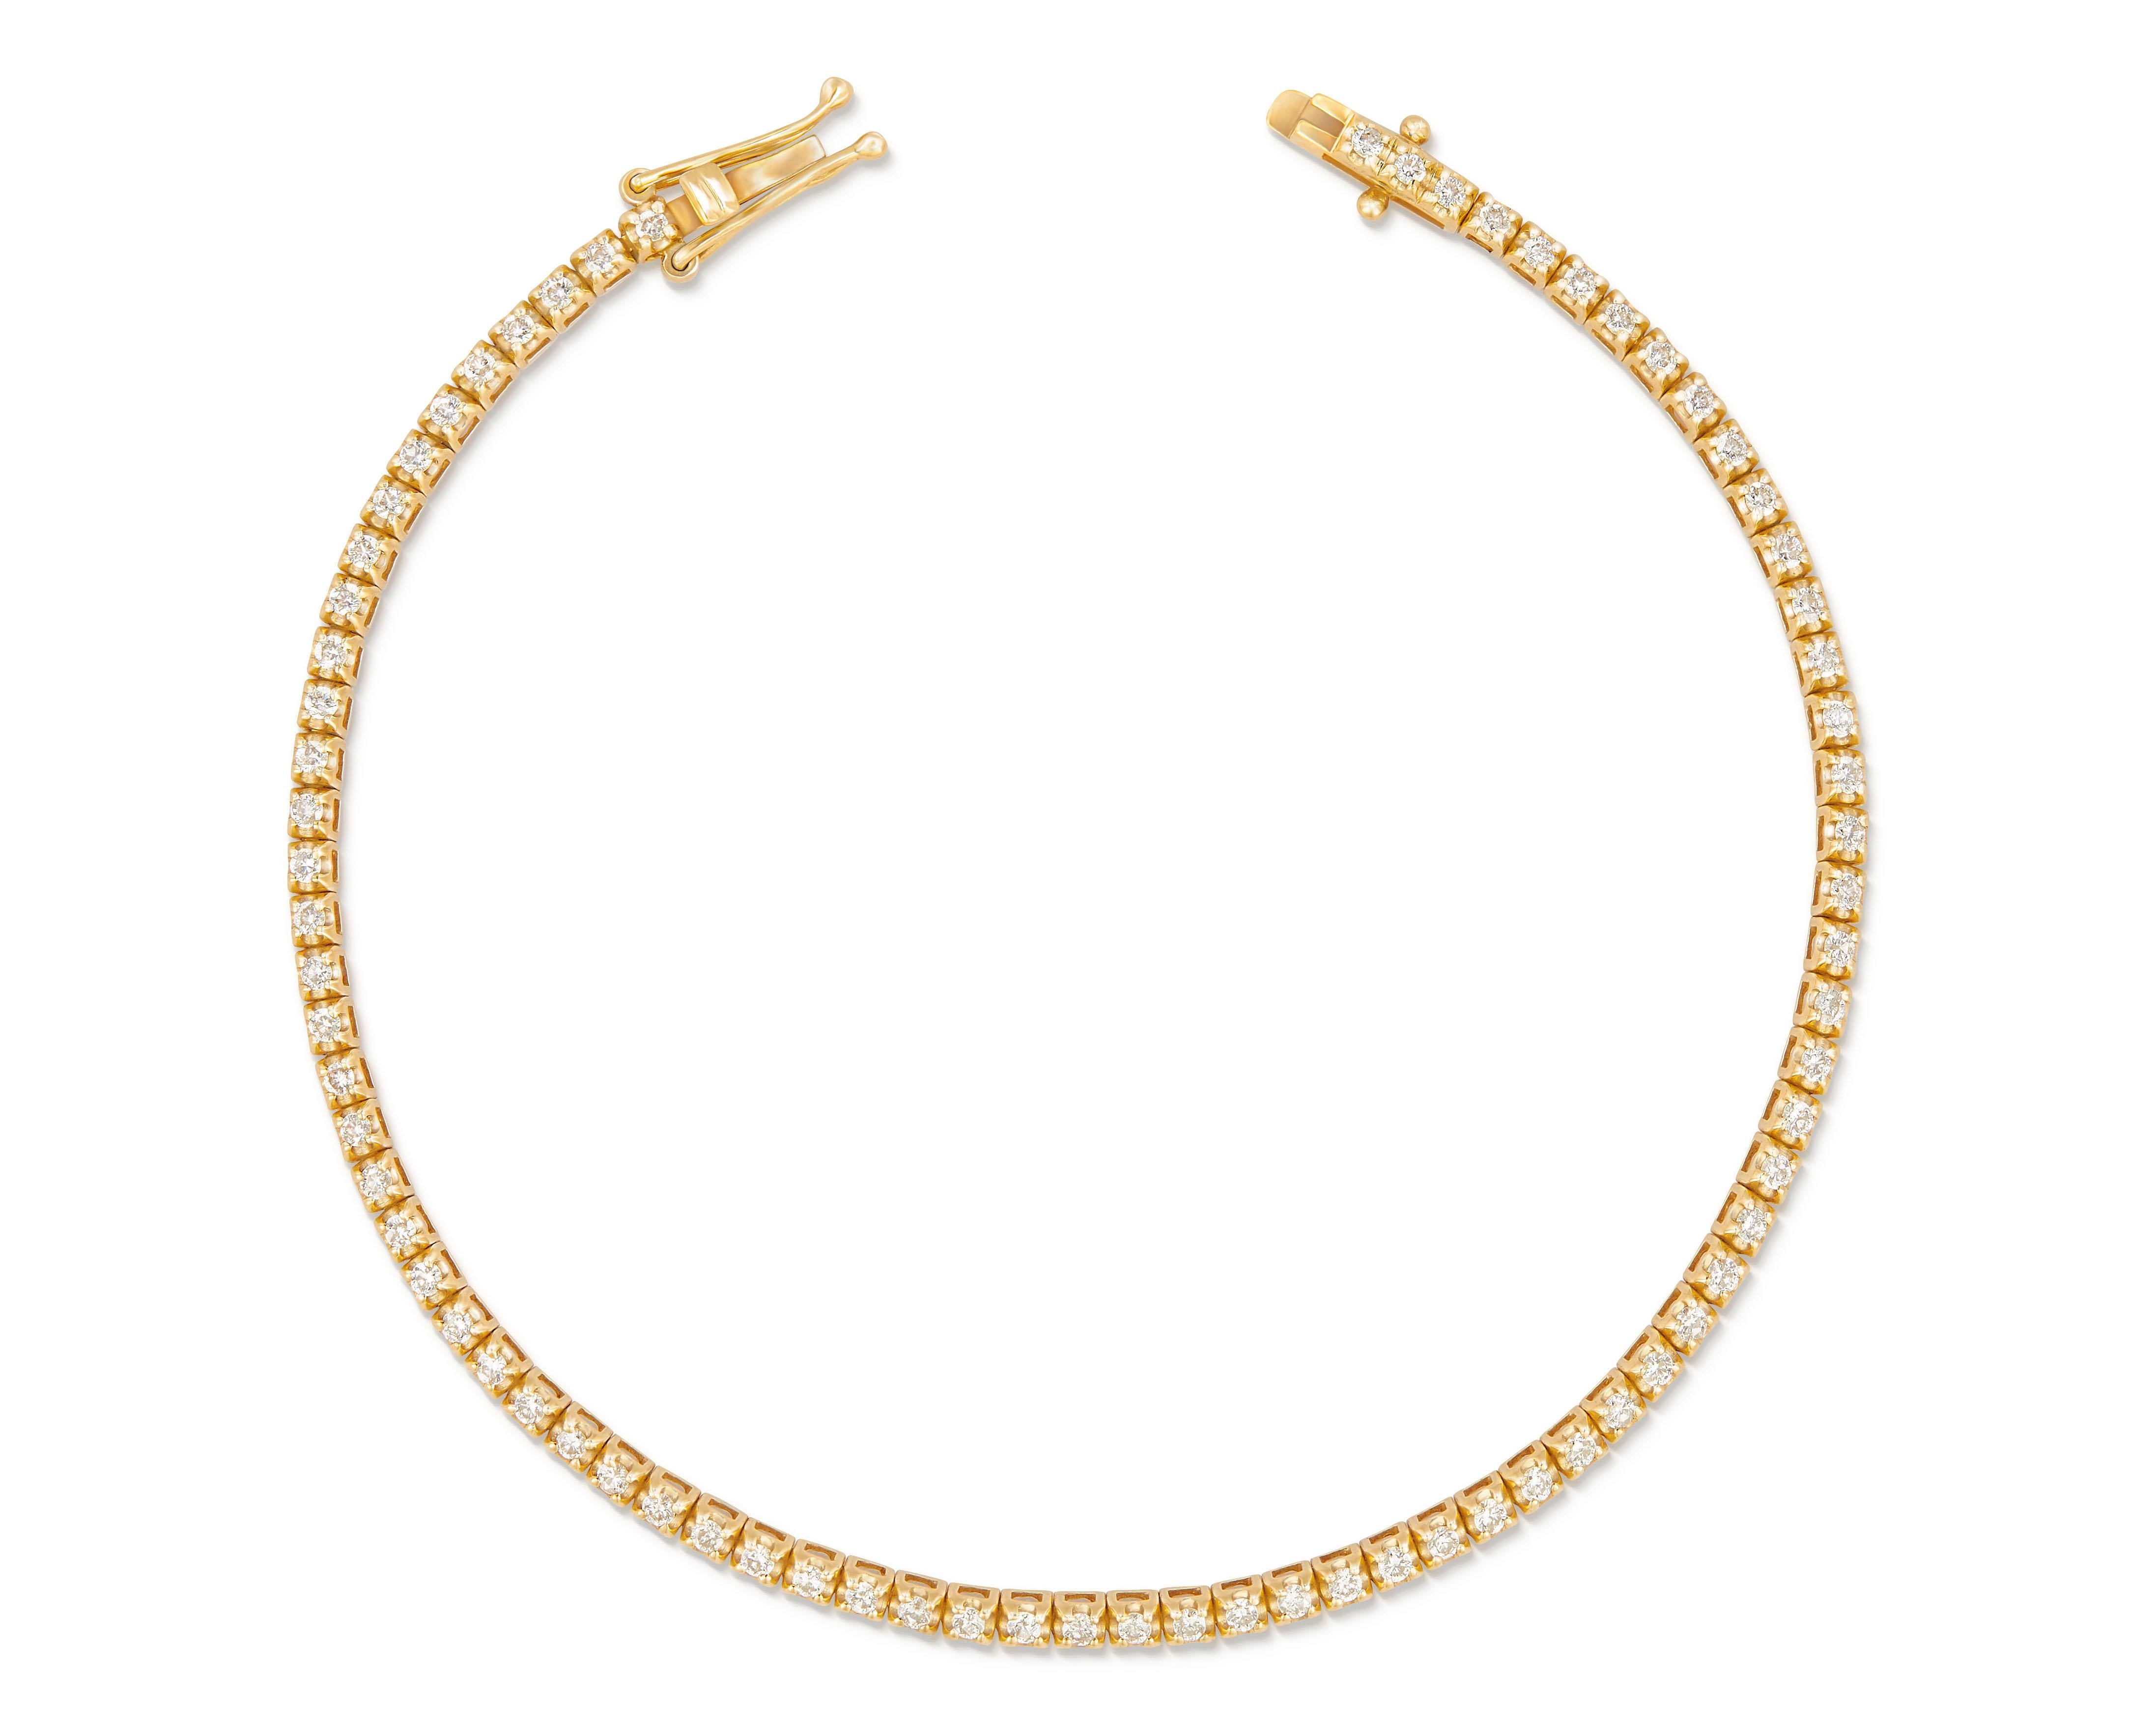 This elegant diamond tennis bracelet features 81 sparkling diamonds set in 18-karat yellow gold. A timeless classic, this piece transitions easily from day to night. The diamonds are set into a 4-prong setting for maximum sparkle.  Bracelet is 7.25